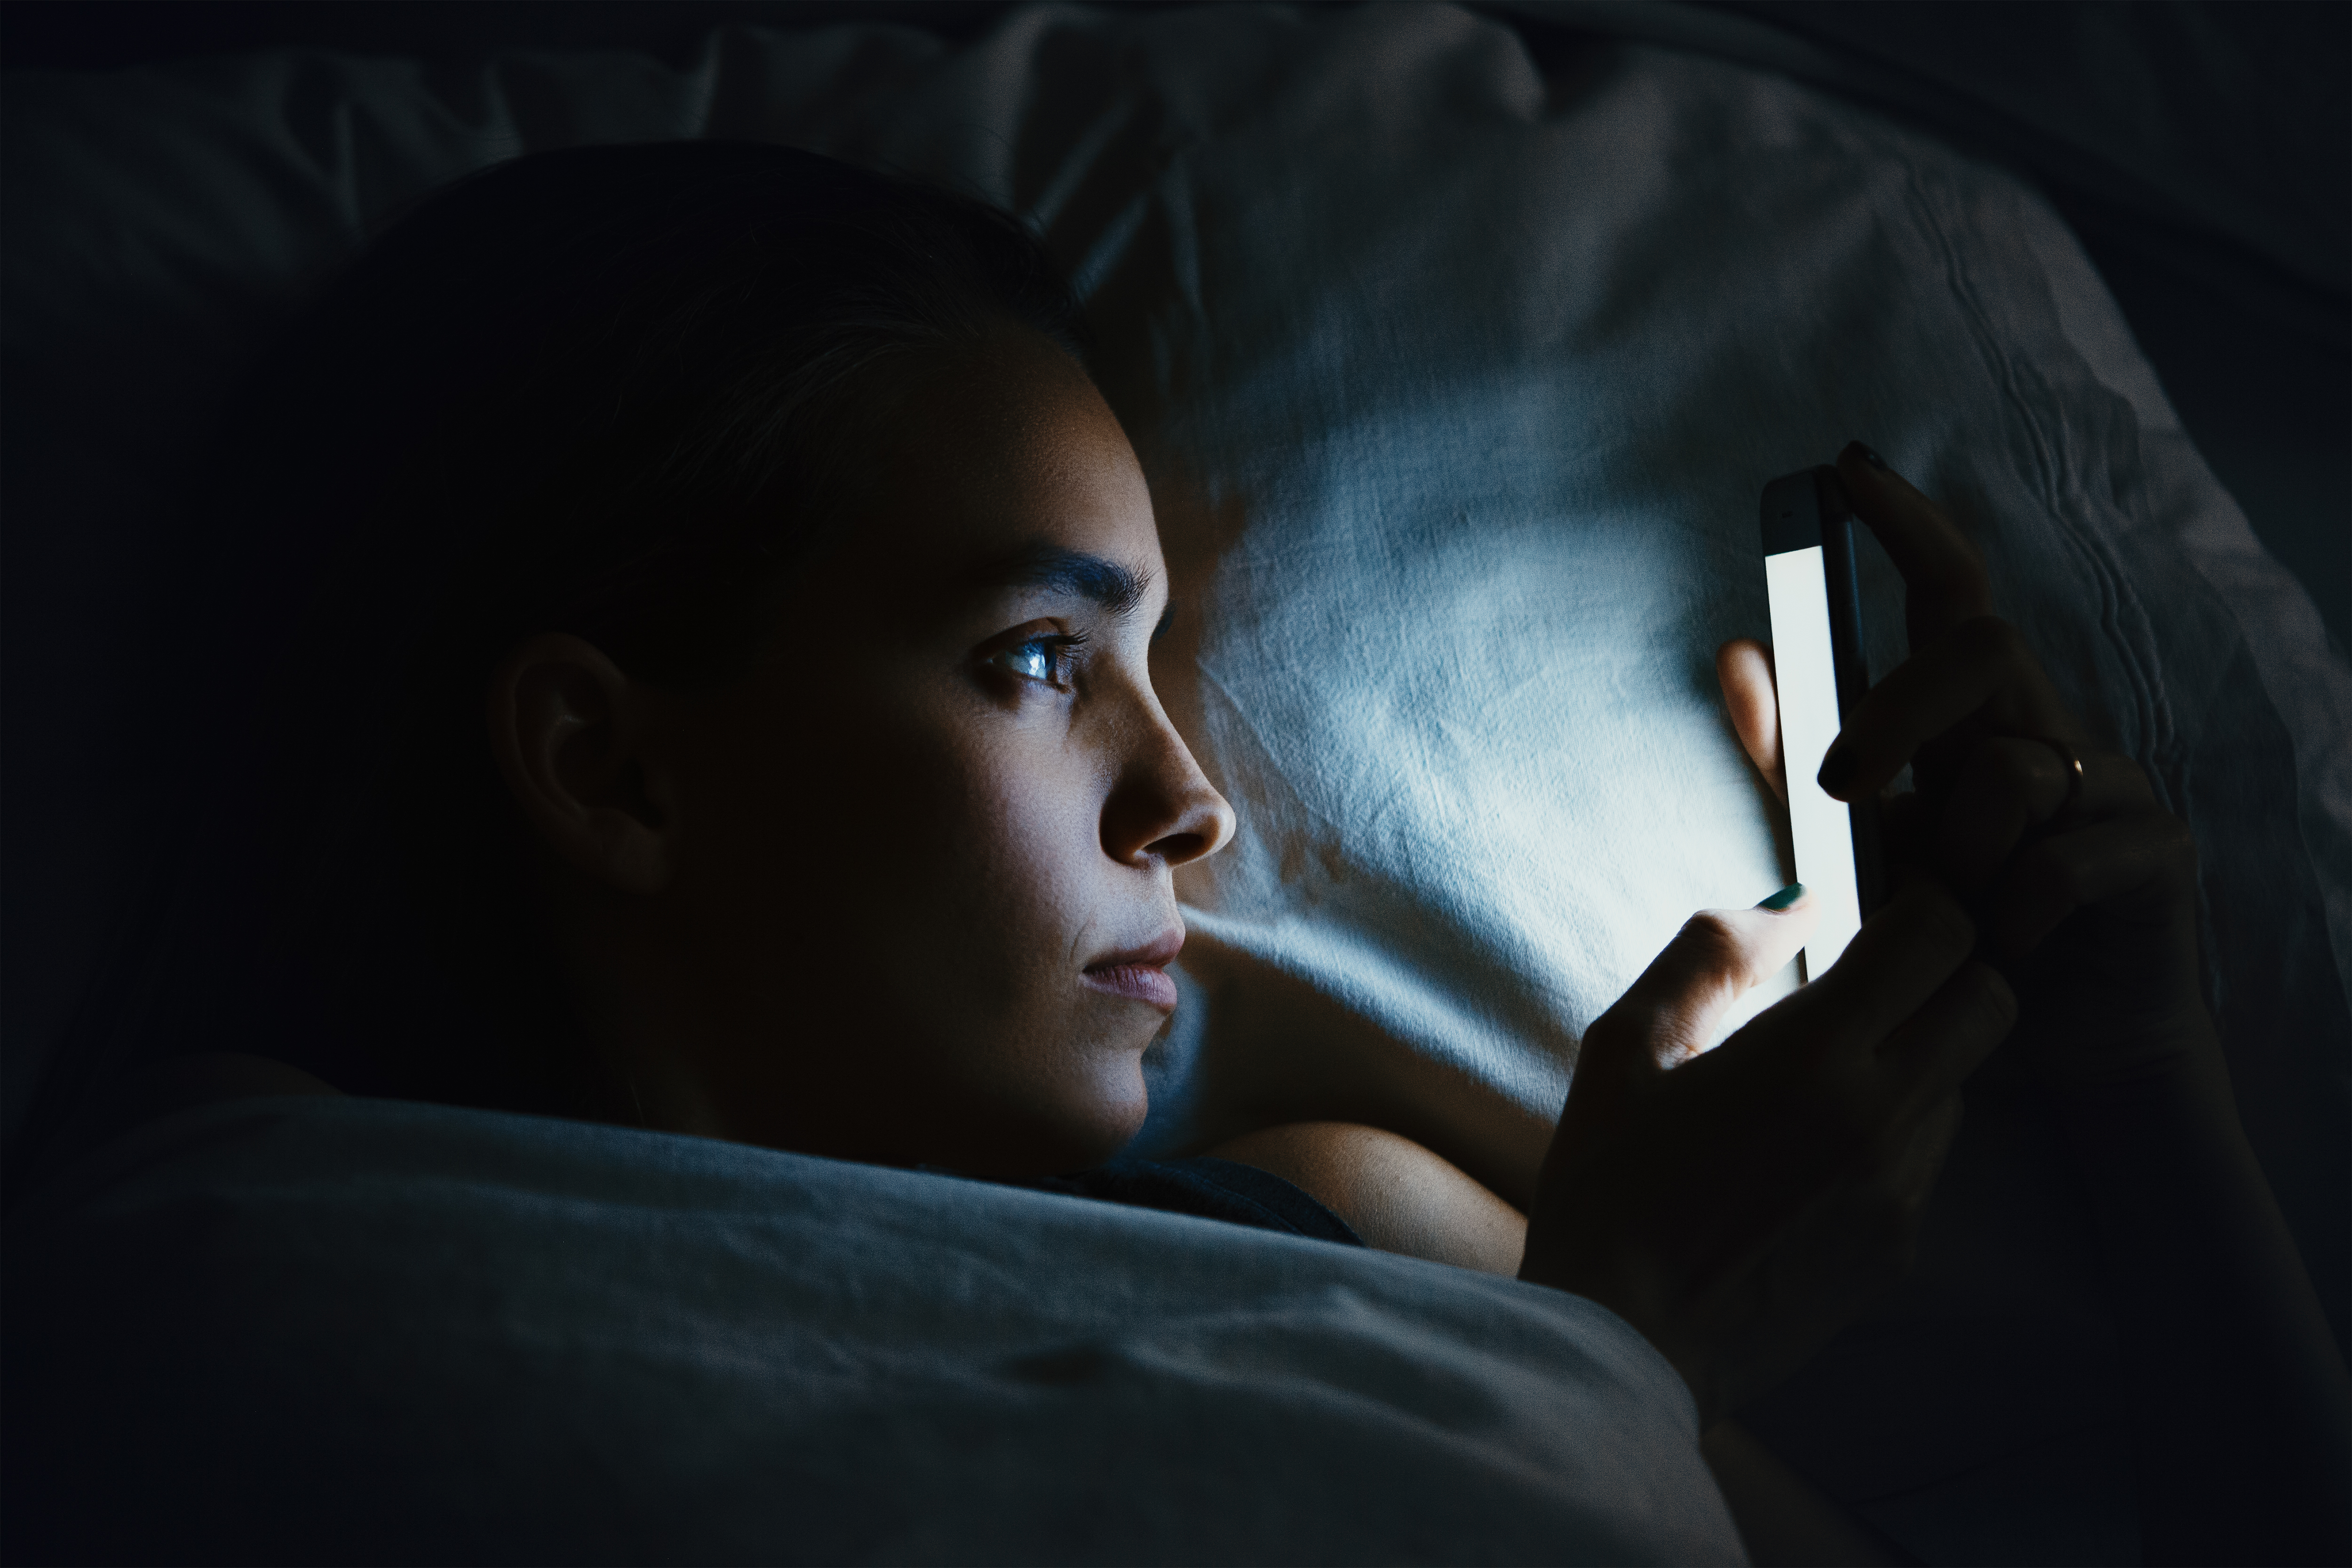 A young woman using a mobile phone in a bed | Source: Shutterstock